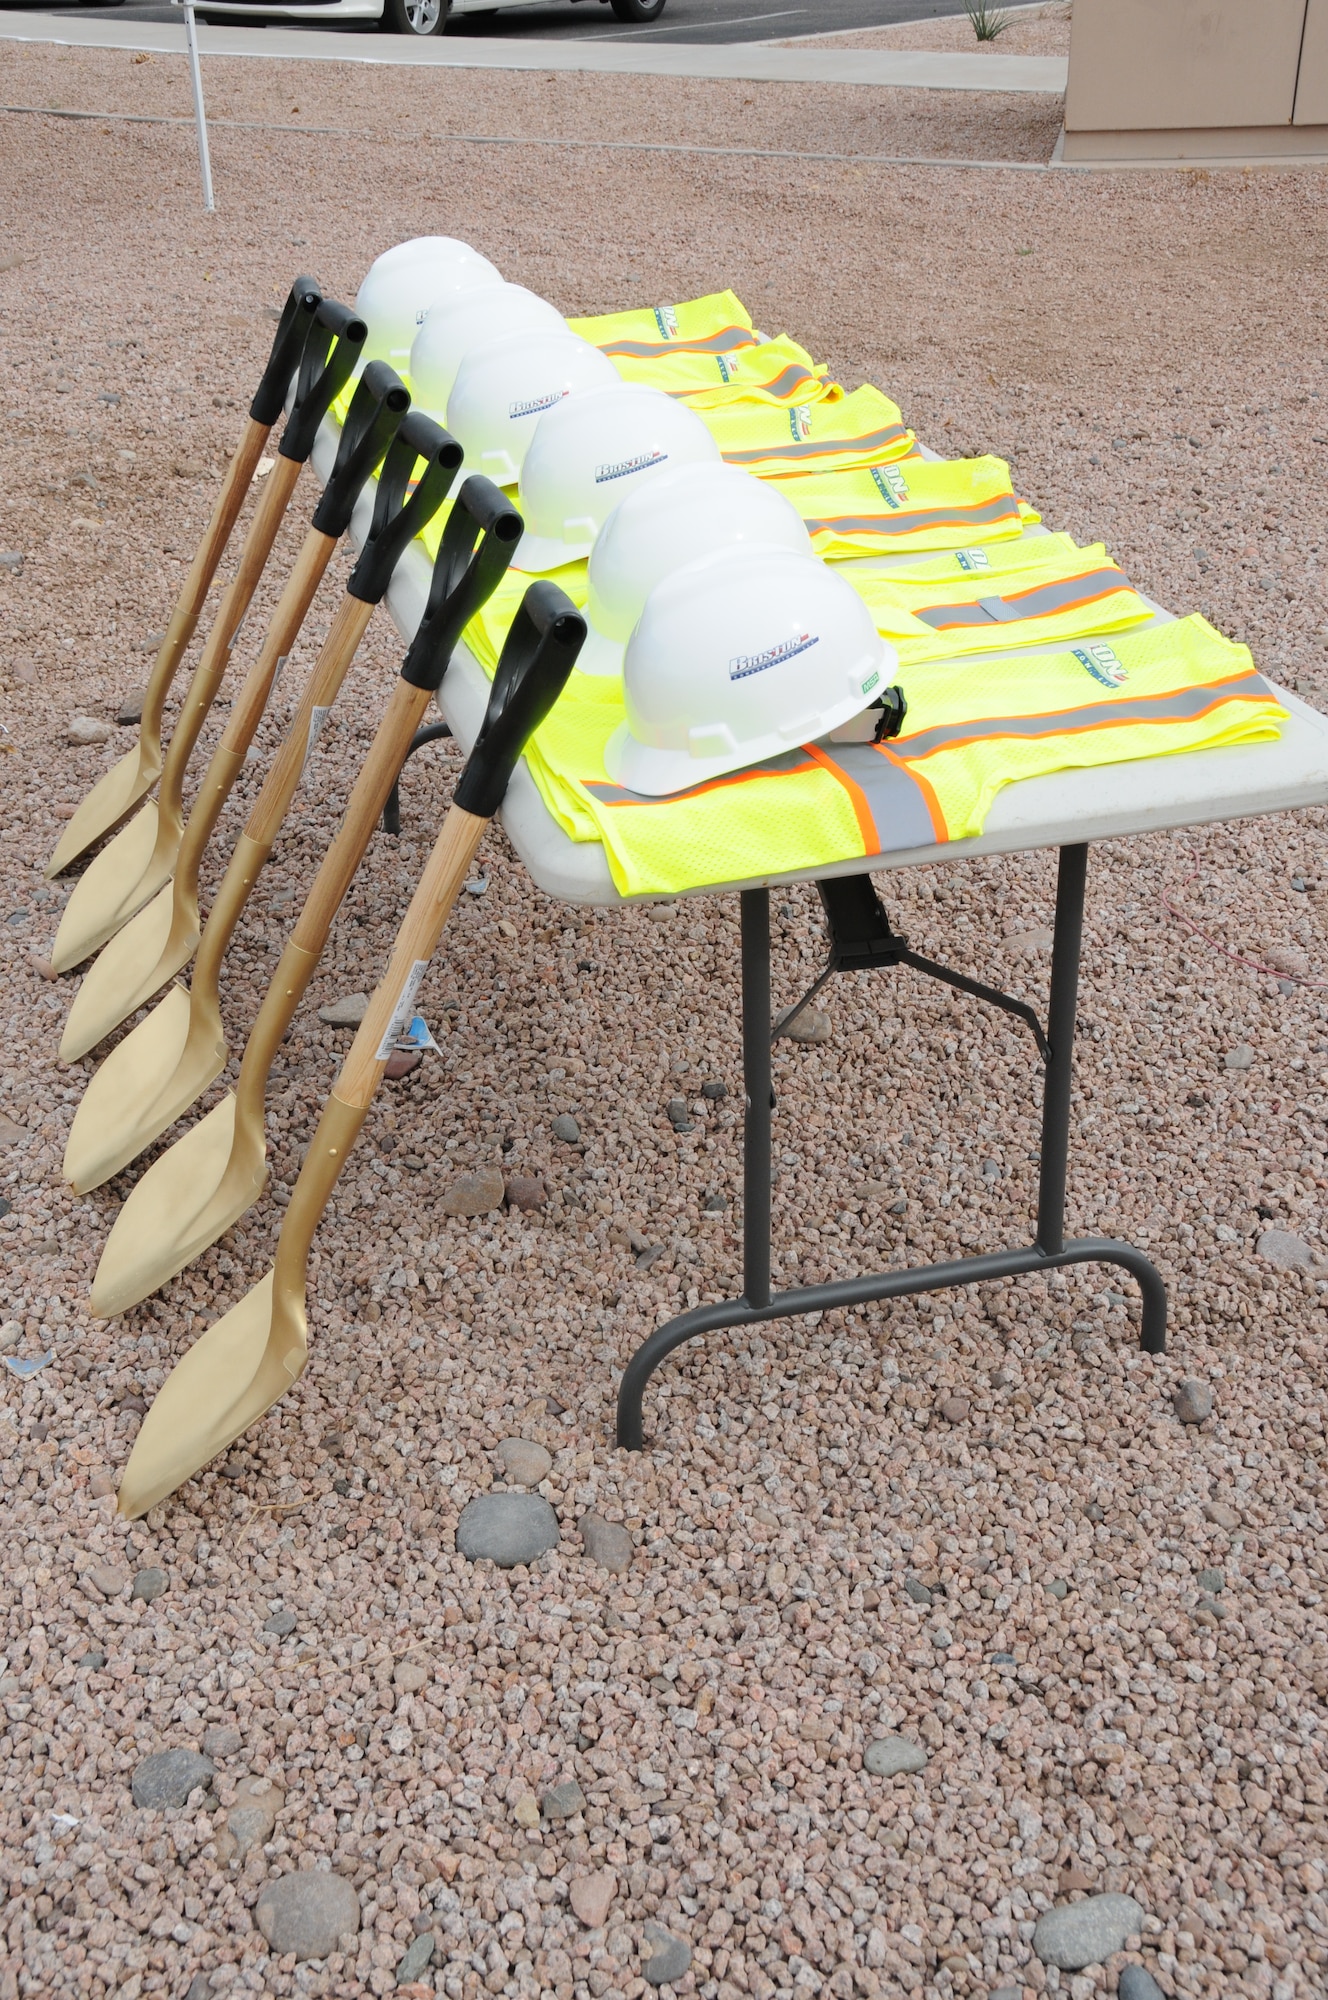 Six hard hats, gold shovels and safety vests are ready for the ground breaking ceremony for the new Base Fitness Center at Phoenix Sky Harbor Air National Guard Base Nov. 14, 2014. The 2,400 square foot fitness center, which is scheduled to open in approximately six months, will provide Airmen twice the square footage of the existing facility, add daylighting features, industrial architecture finishes, 20 foot vaulted ceilings and reverse osmosis drinking water. (U. S. Air National Guard photo by Master Sgt. Kelly M. Deitloff/Released)